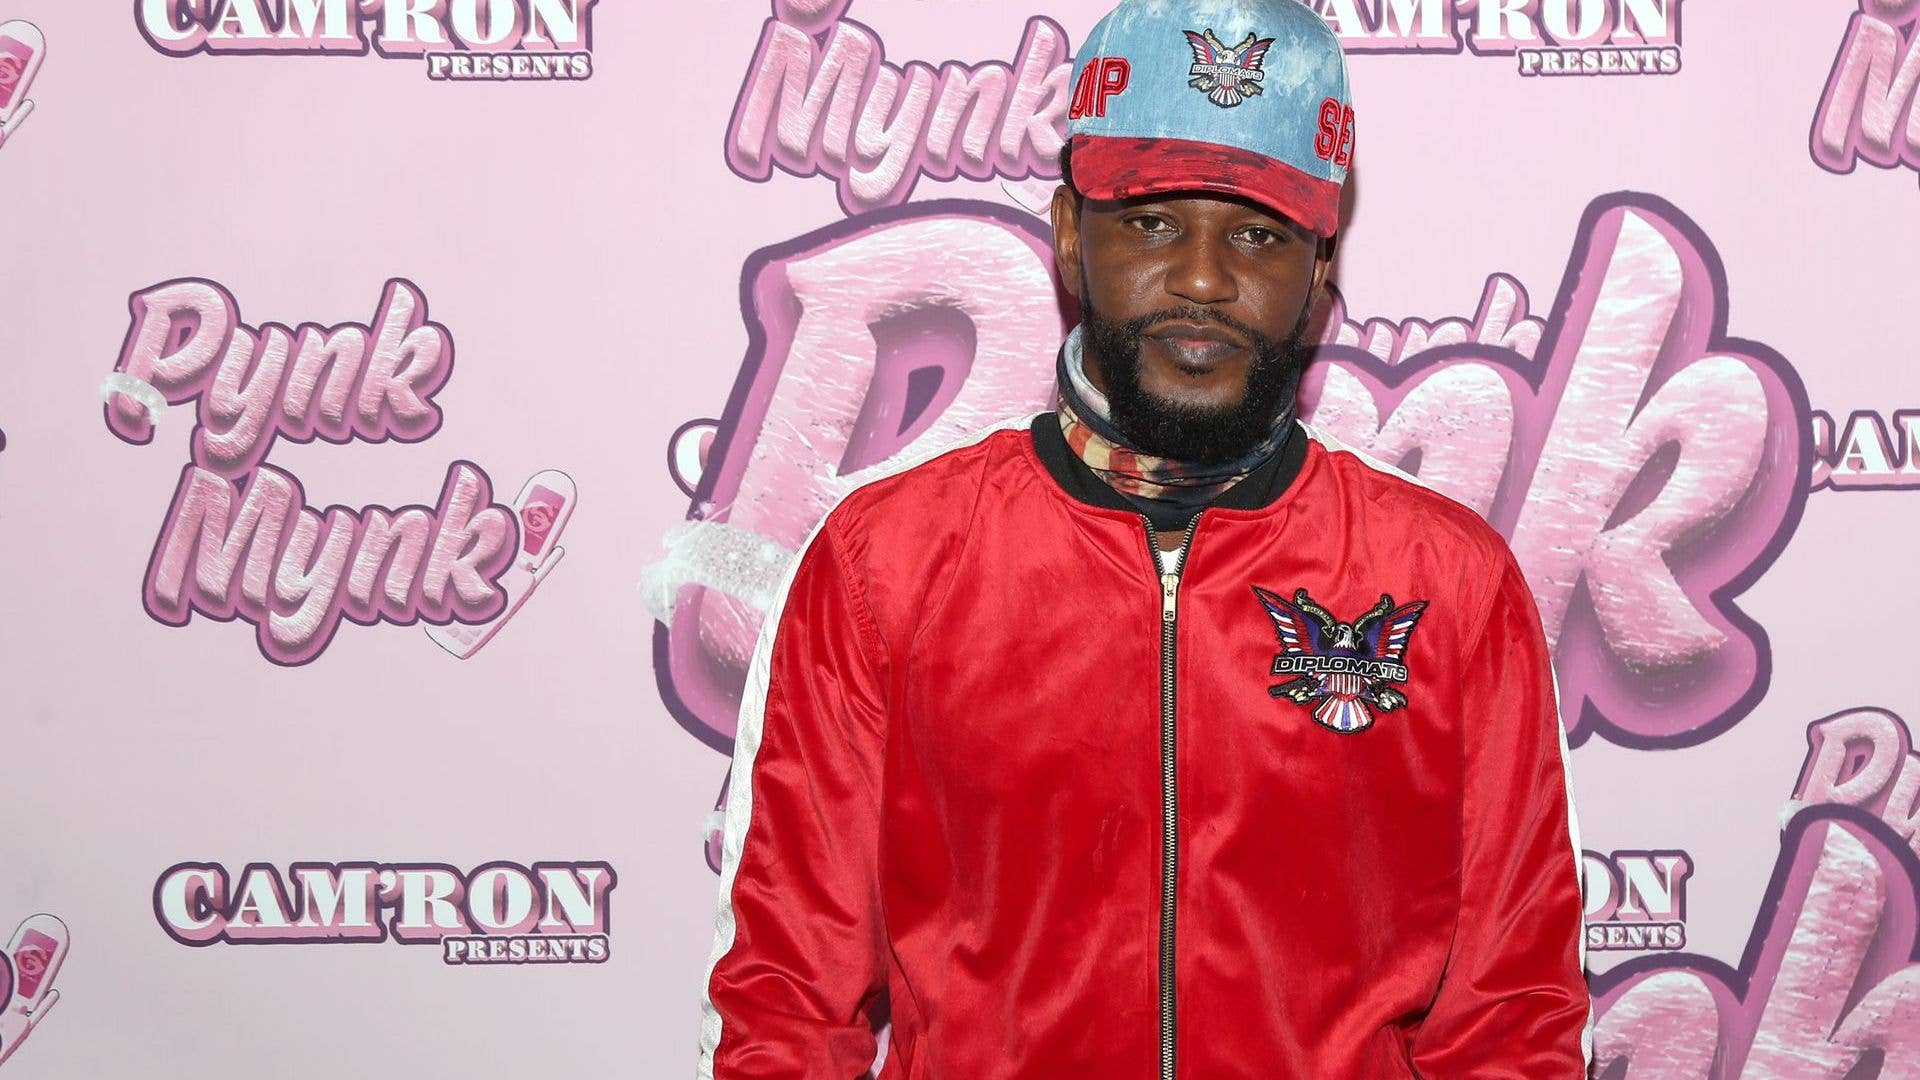 Rapper Cam'ron attends Cam'ron's Pynk Mynk Unveiling